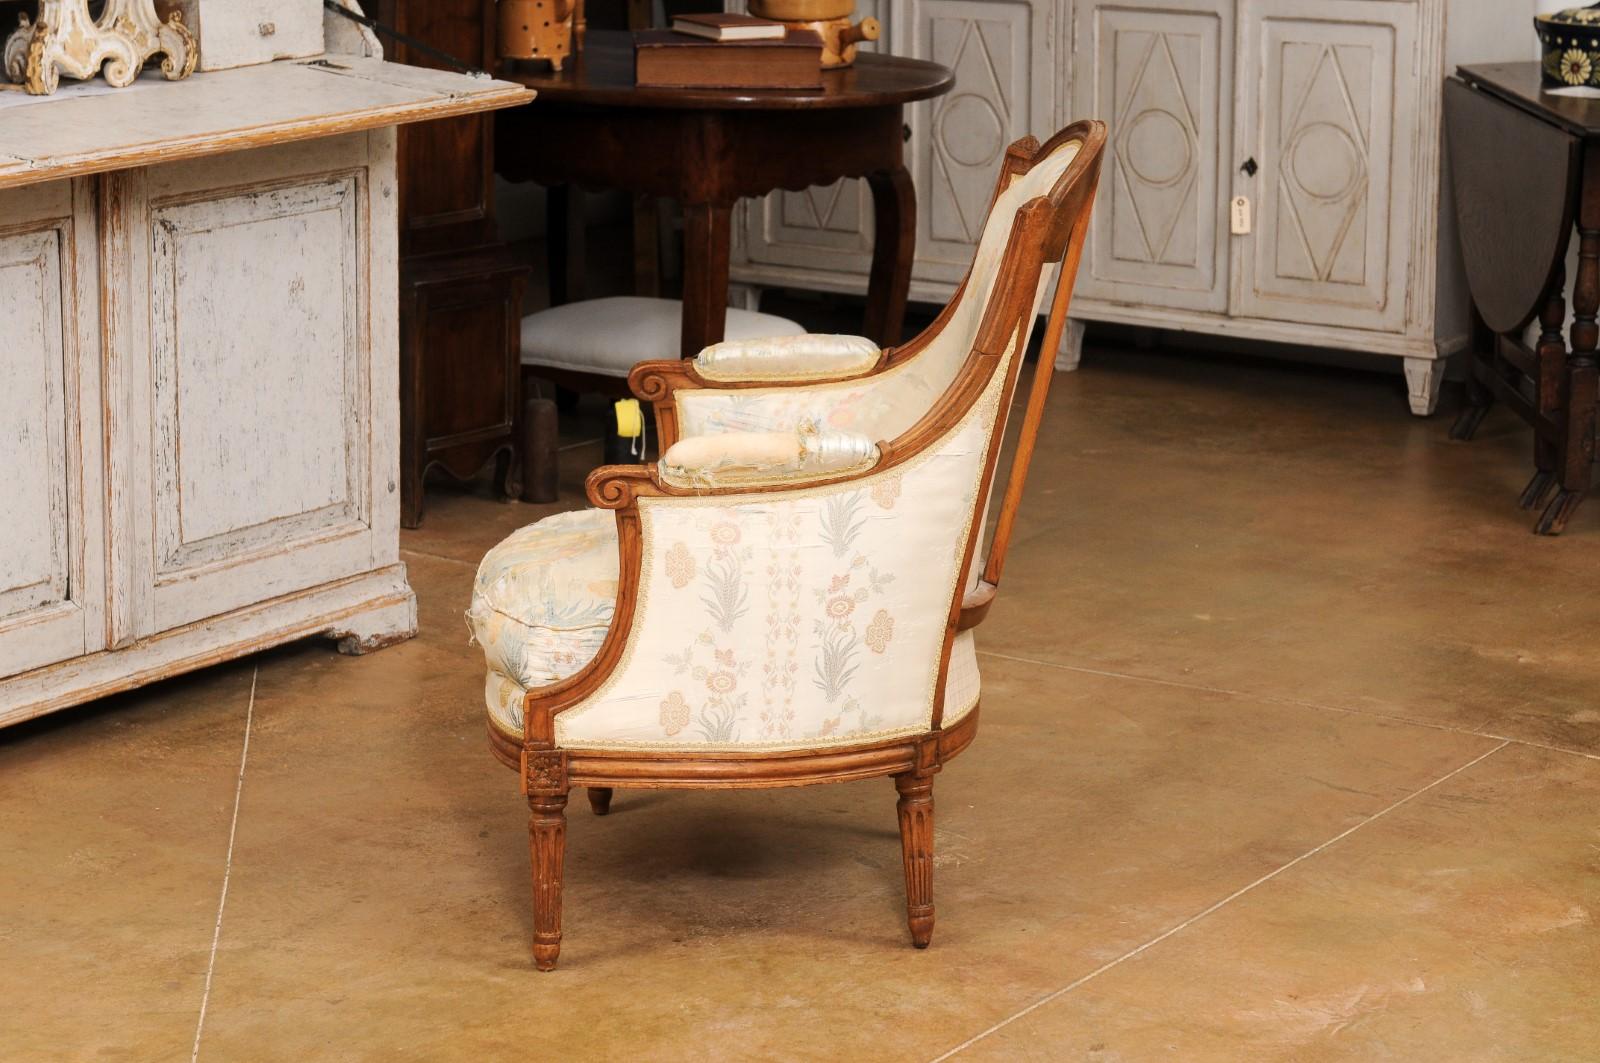 French Louis XVI Period Late 18th Century Walnut Bergère Chair with Curving Back For Sale 5